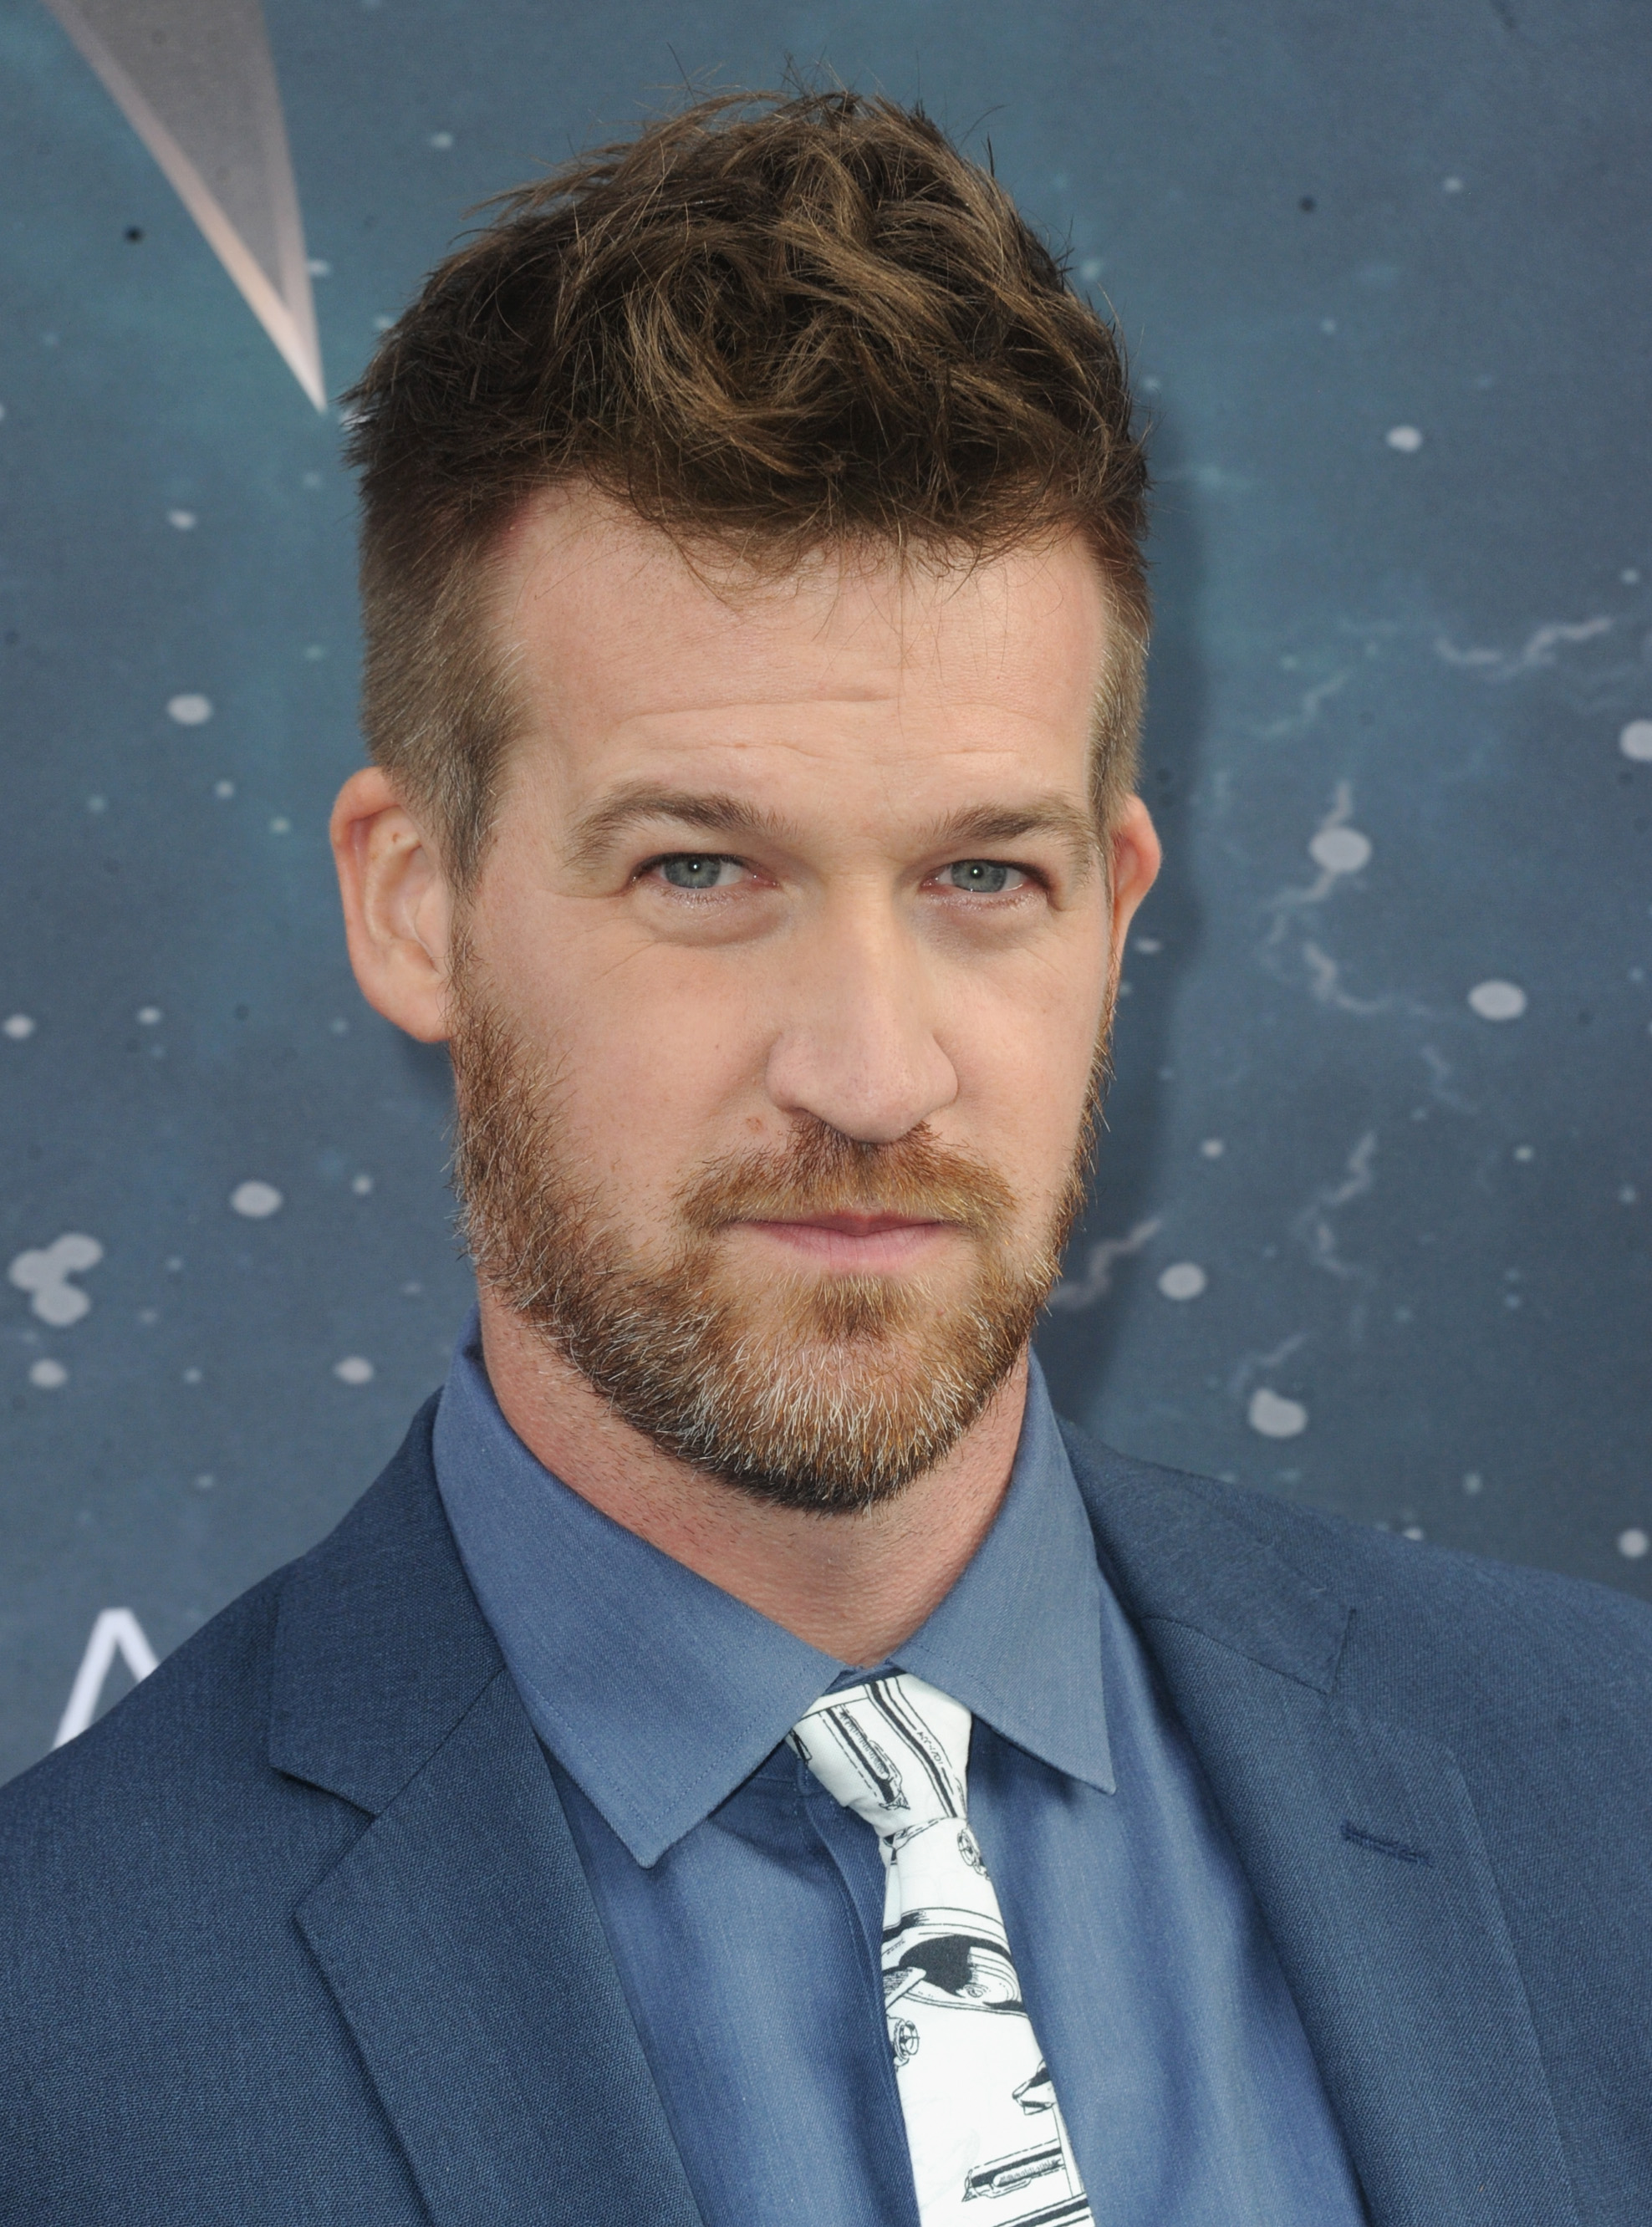 Kenneth Mitchell attends the Premiere Of CBS's "Star Trek: Discovery" on September 19, 2017 in Los Angeles, California | Source: Getty Images